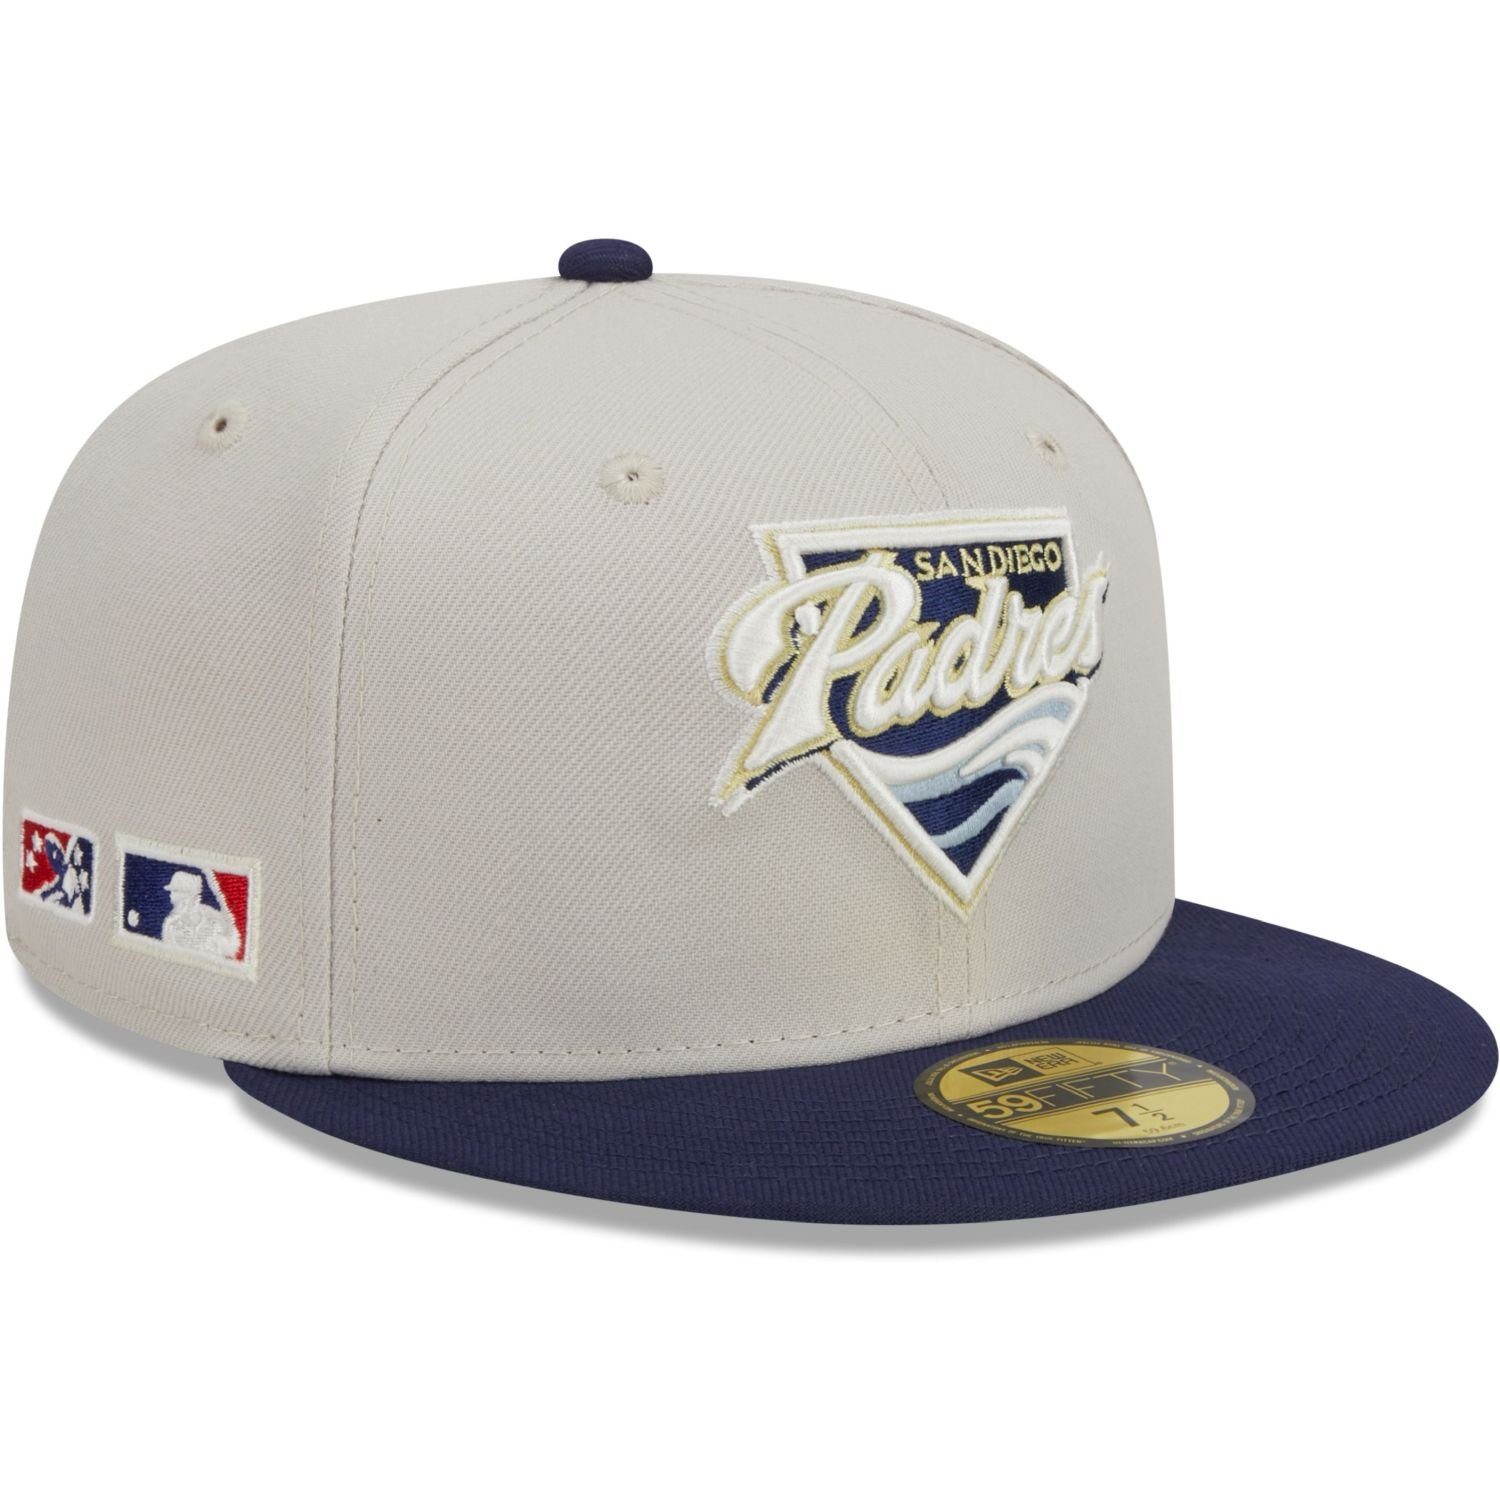 FARM Era Diego San Cap Fitted 59Fifty New TEAM Padres